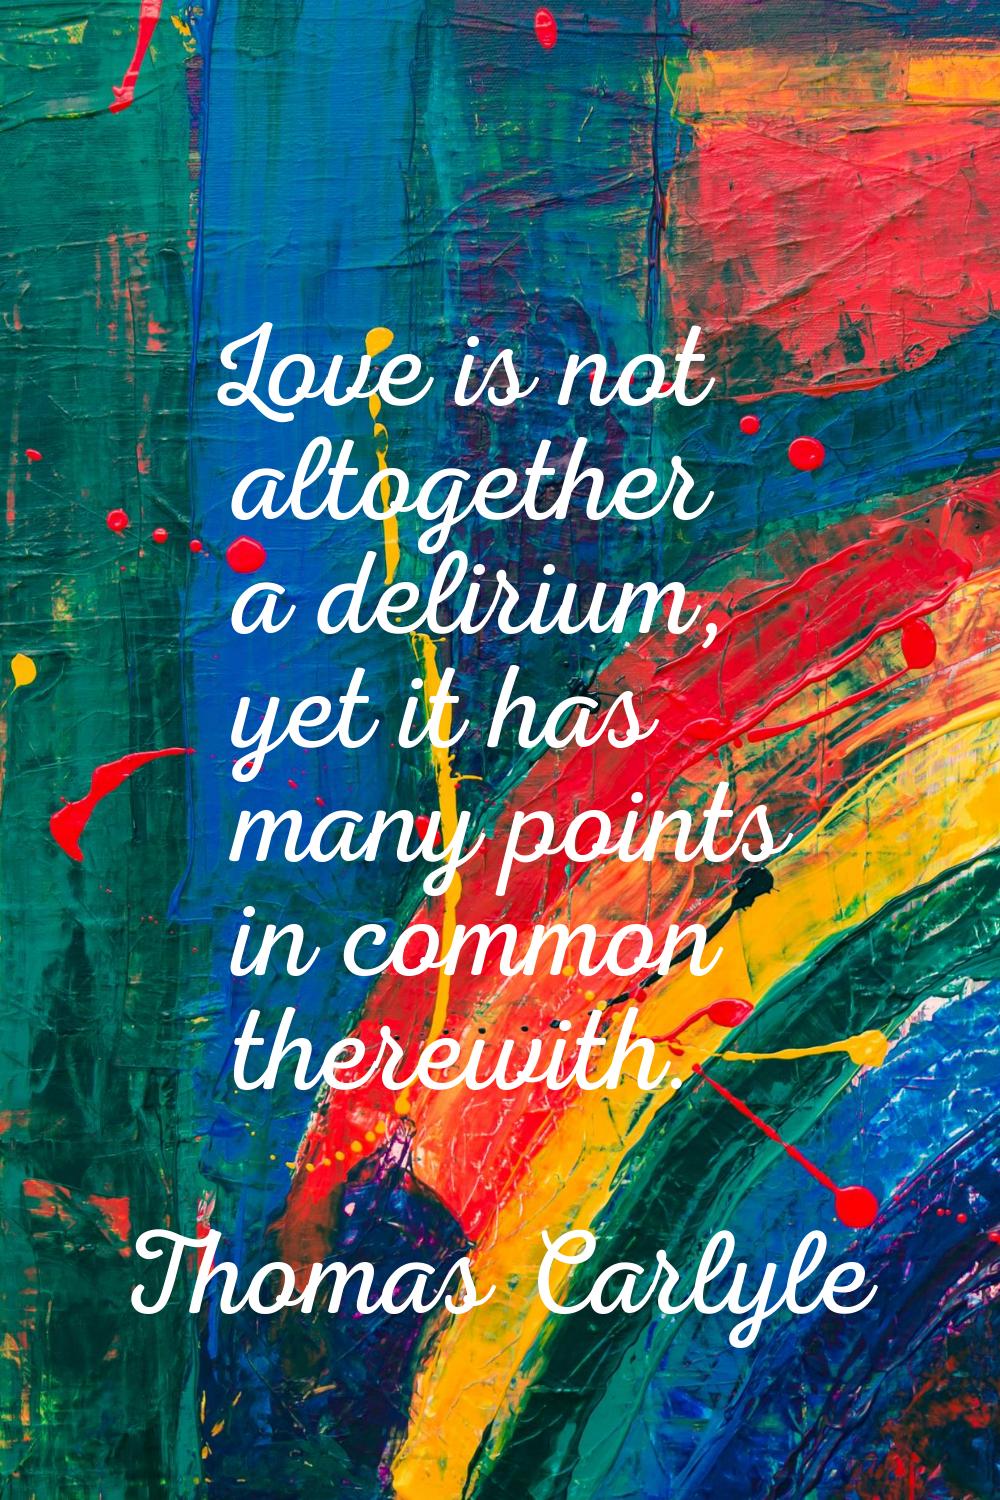 Love is not altogether a delirium, yet it has many points in common therewith.